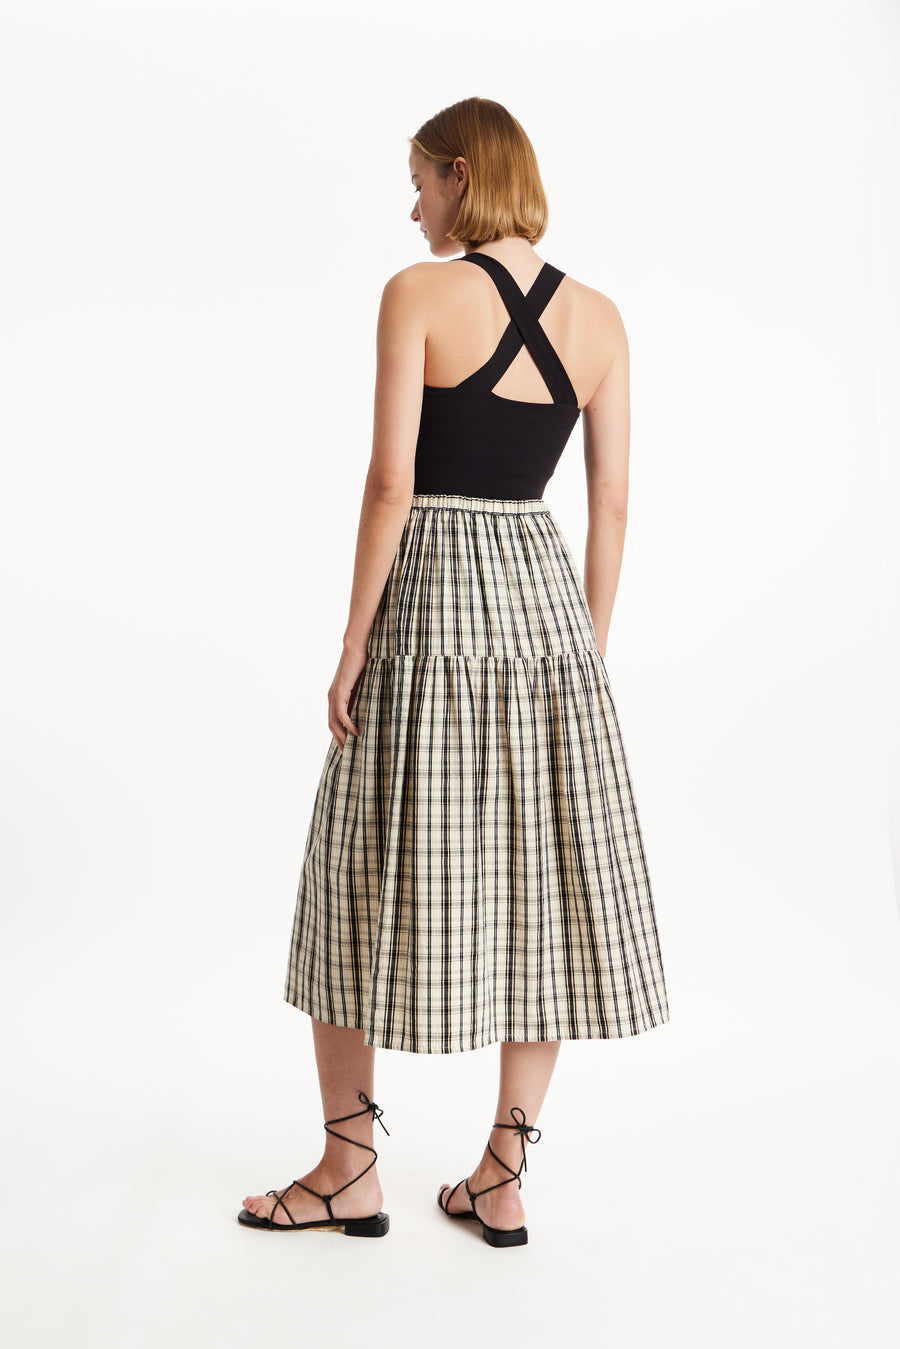 People Tree Fair Trade, Ethical & Sustainable Ulla Checked Skirt in Black check 100% Organic Cotton